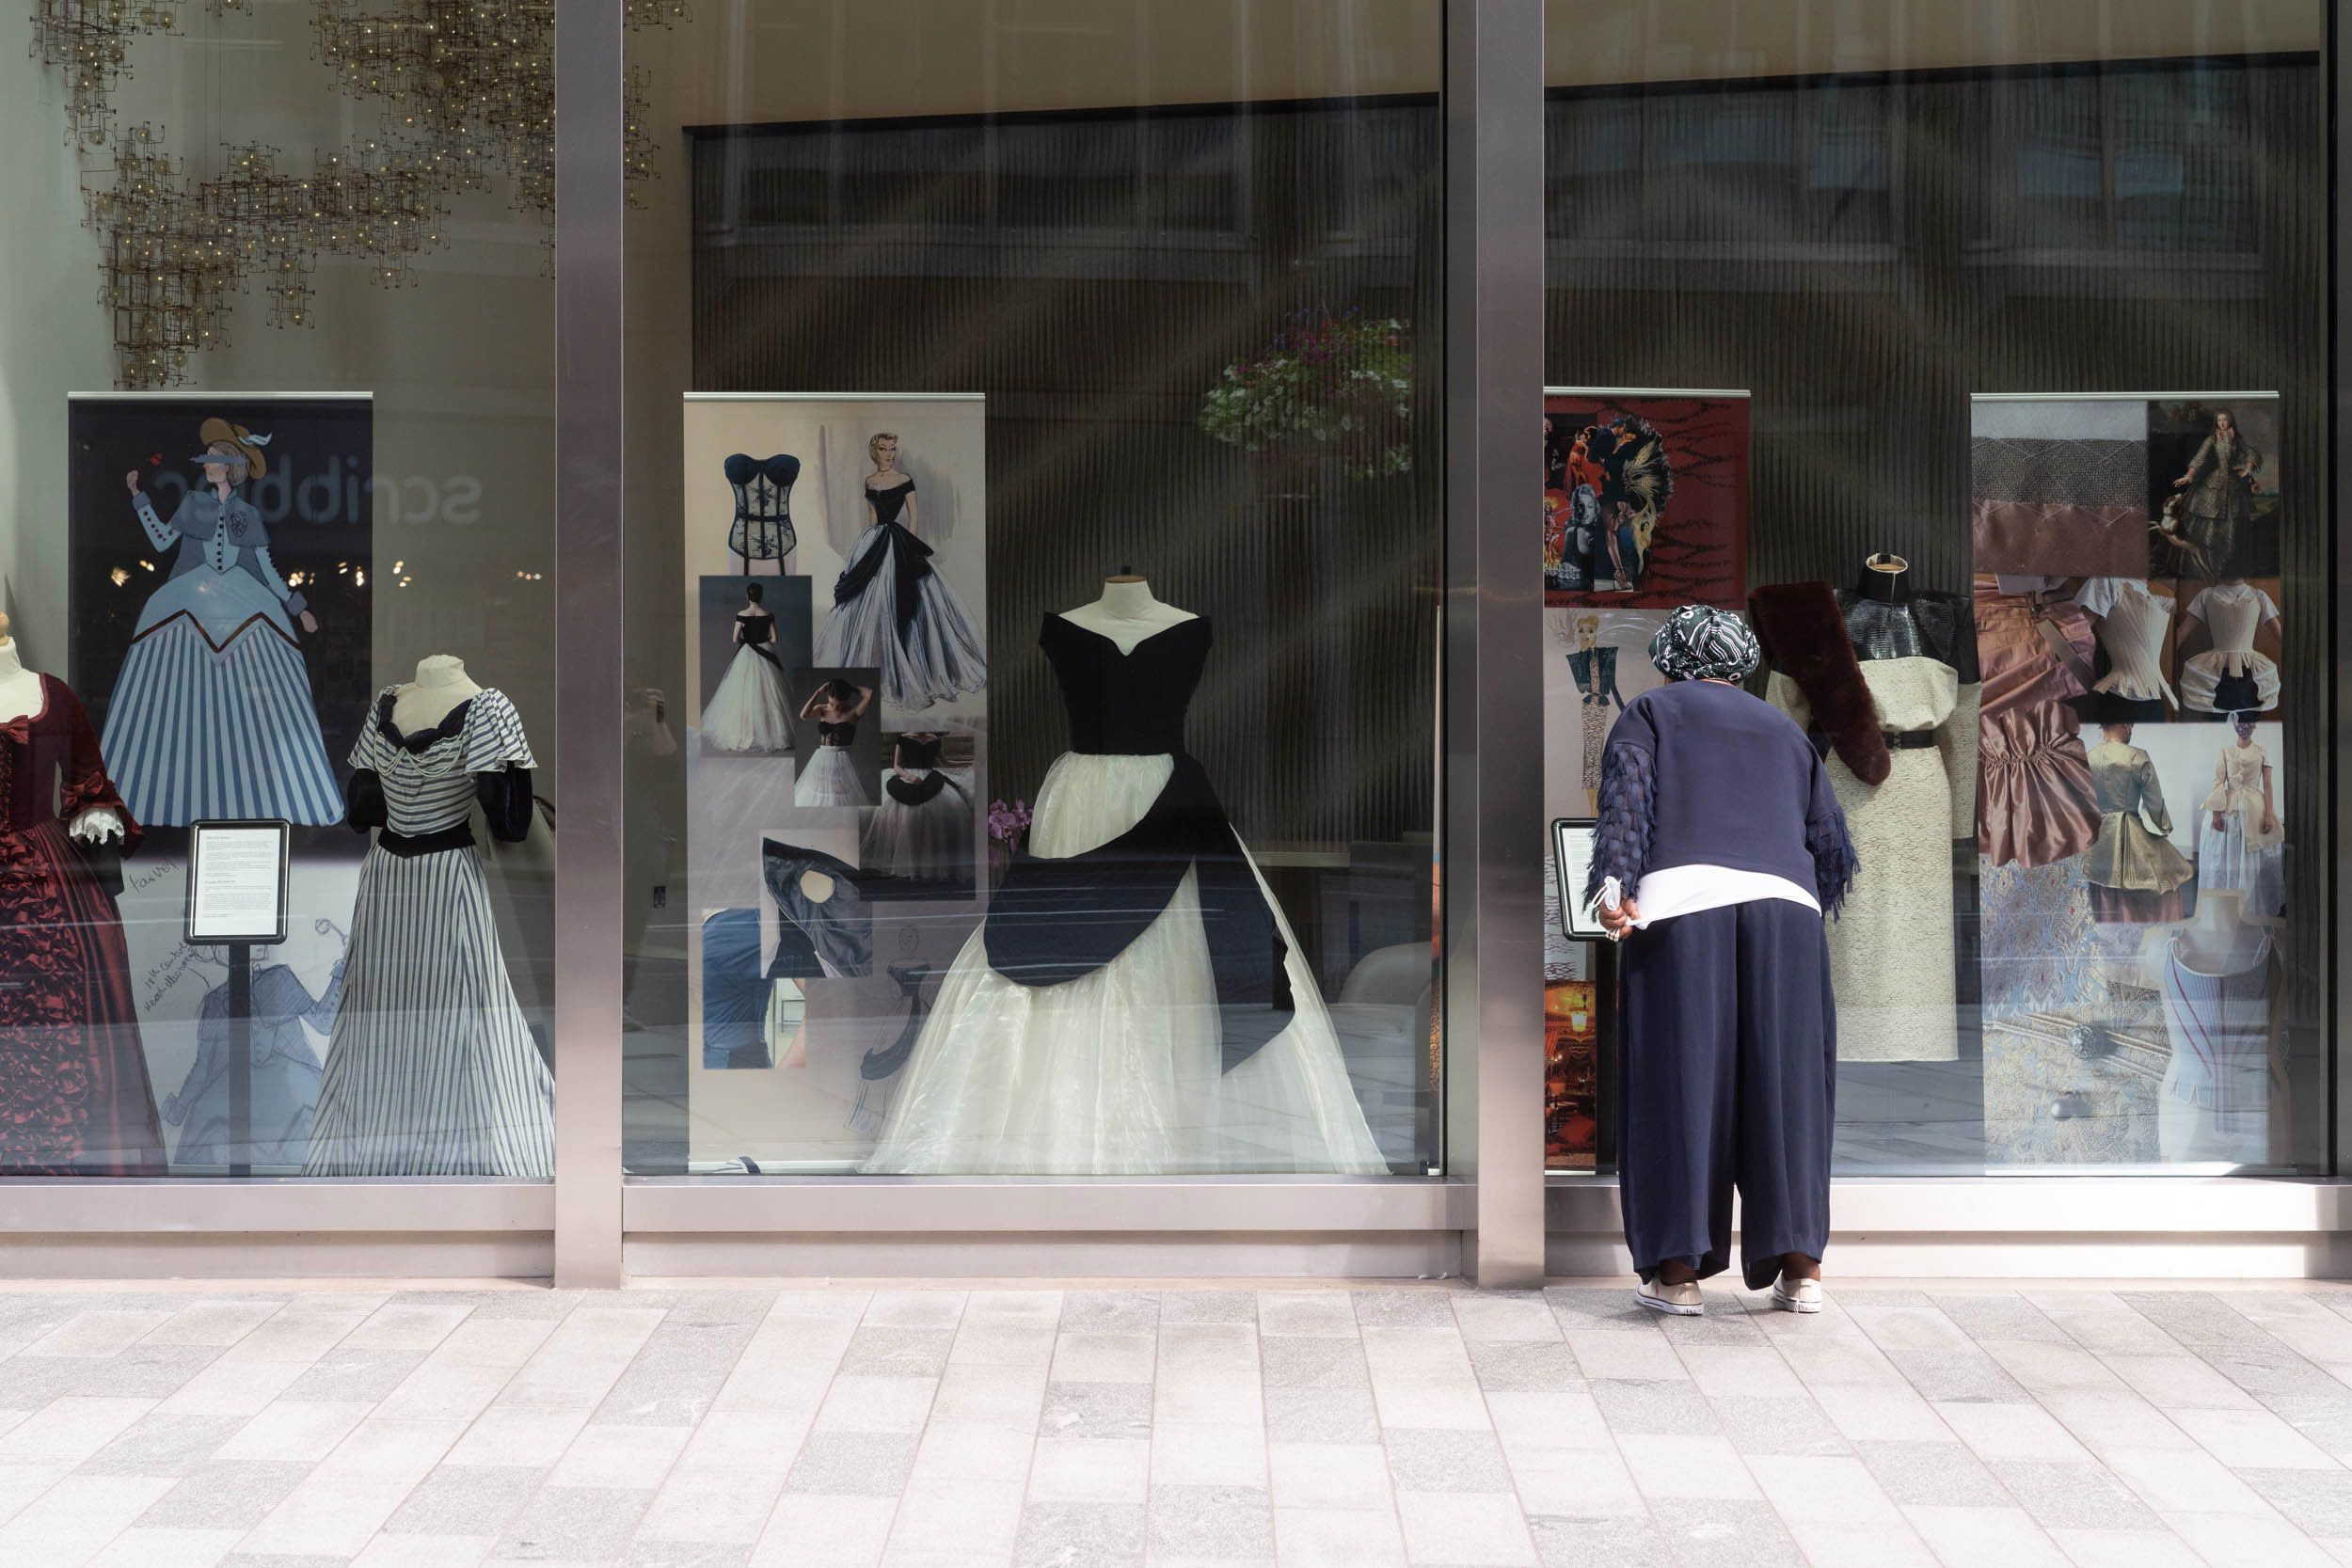 A woman with her back to the camera peers into a large shop window where three elaborate costumes are on display